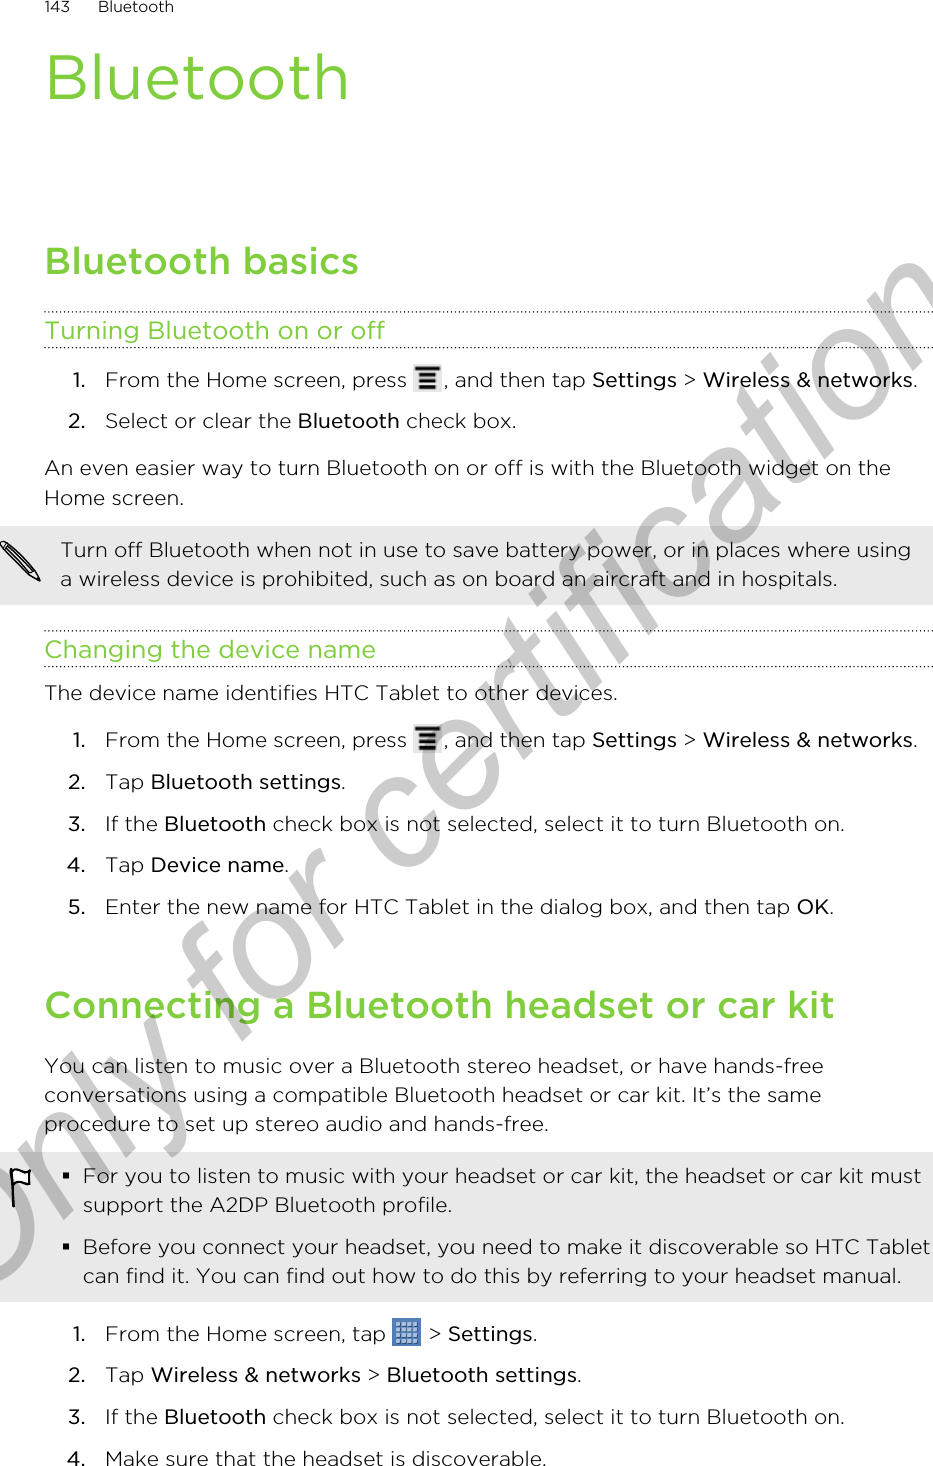 BluetoothBluetooth basicsTurning Bluetooth on or off1. From the Home screen, press  , and then tap Settings &gt; Wireless &amp; networks.2. Select or clear the Bluetooth check box.An even easier way to turn Bluetooth on or off is with the Bluetooth widget on theHome screen.Turn off Bluetooth when not in use to save battery power, or in places where usinga wireless device is prohibited, such as on board an aircraft and in hospitals.Changing the device nameThe device name identifies HTC Tablet to other devices.1. From the Home screen, press  , and then tap Settings &gt; Wireless &amp; networks.2. Tap Bluetooth settings.3. If the Bluetooth check box is not selected, select it to turn Bluetooth on.4. Tap Device name.5. Enter the new name for HTC Tablet in the dialog box, and then tap OK.Connecting a Bluetooth headset or car kitYou can listen to music over a Bluetooth stereo headset, or have hands-freeconversations using a compatible Bluetooth headset or car kit. It’s the sameprocedure to set up stereo audio and hands-free.§For you to listen to music with your headset or car kit, the headset or car kit mustsupport the A2DP Bluetooth profile.§Before you connect your headset, you need to make it discoverable so HTC Tabletcan find it. You can find out how to do this by referring to your headset manual.1. From the Home screen, tap   &gt; Settings.2. Tap Wireless &amp; networks &gt; Bluetooth settings.3. If the Bluetooth check box is not selected, select it to turn Bluetooth on.4. Make sure that the headset is discoverable.143 BluetoothOnly for certification